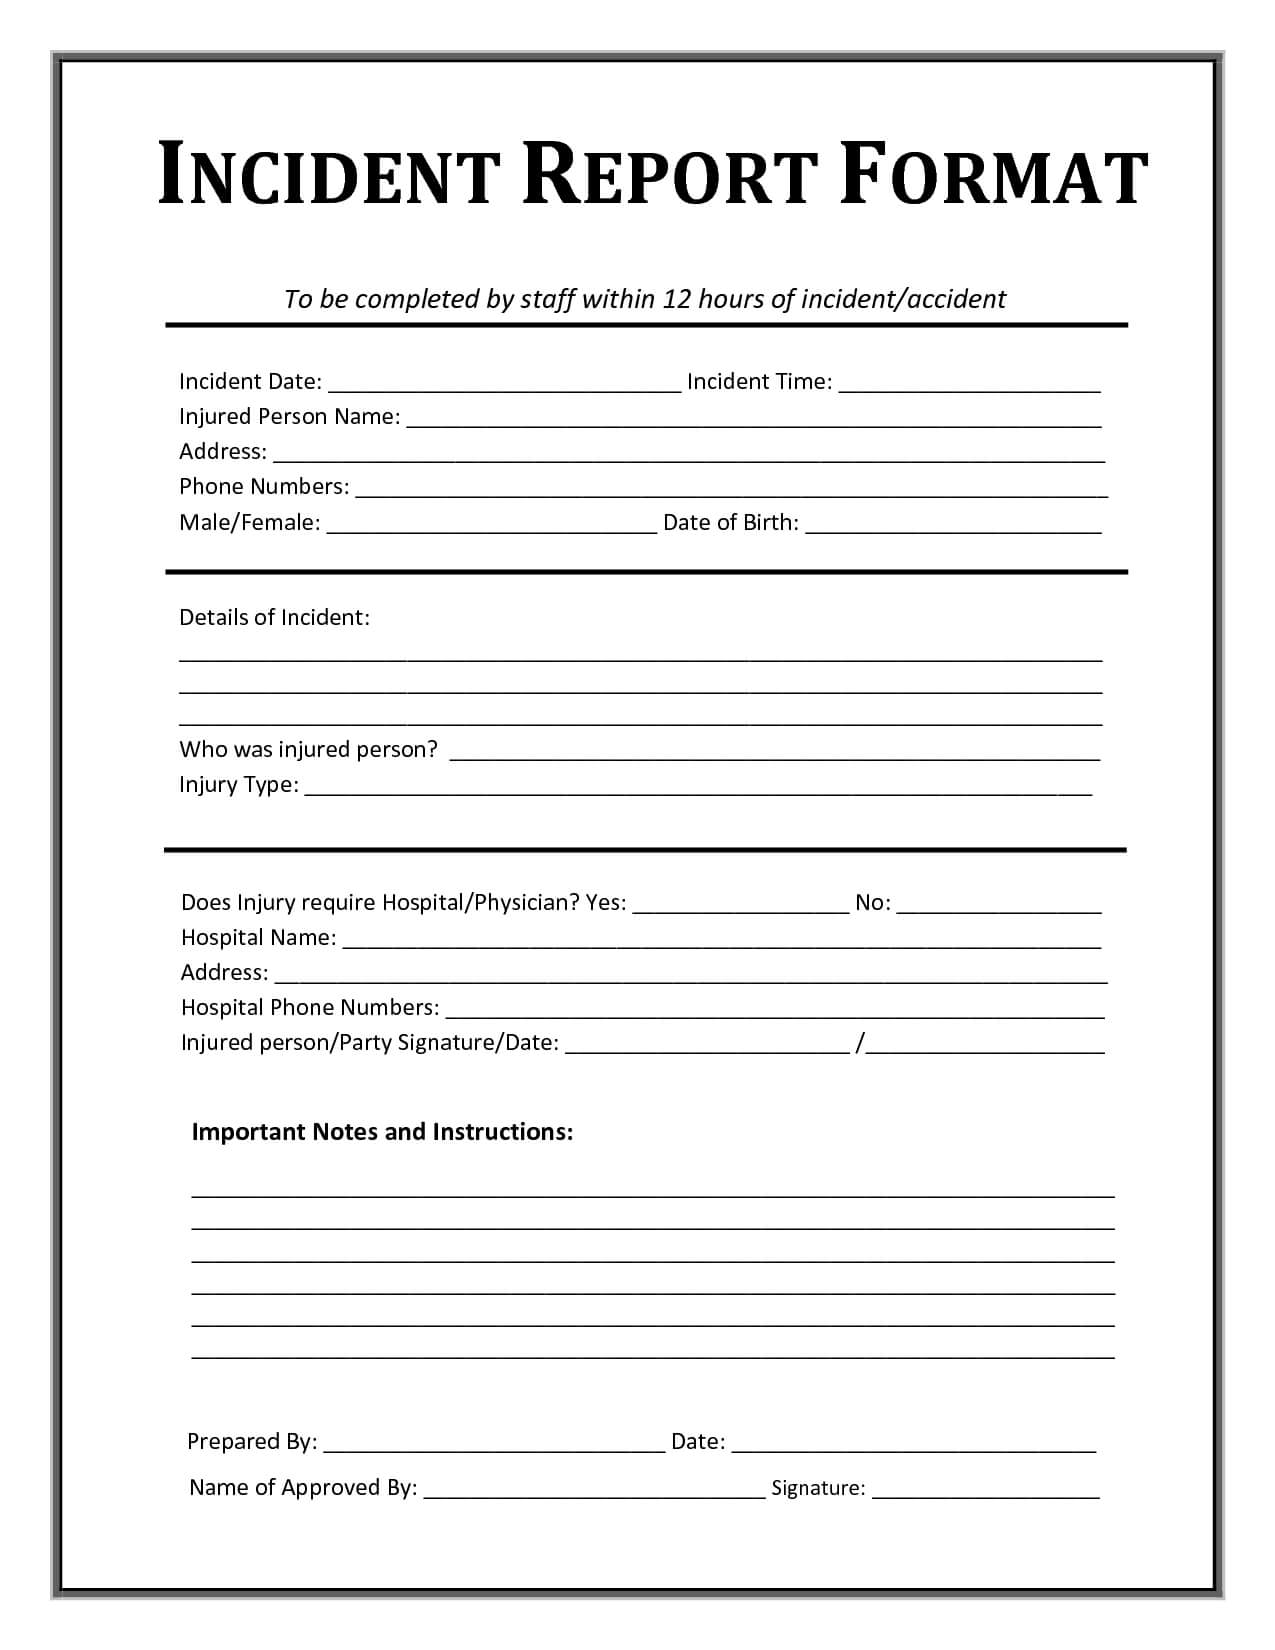 Incident Report Form Template Microsoft Excel | Report For School Incident Report Template